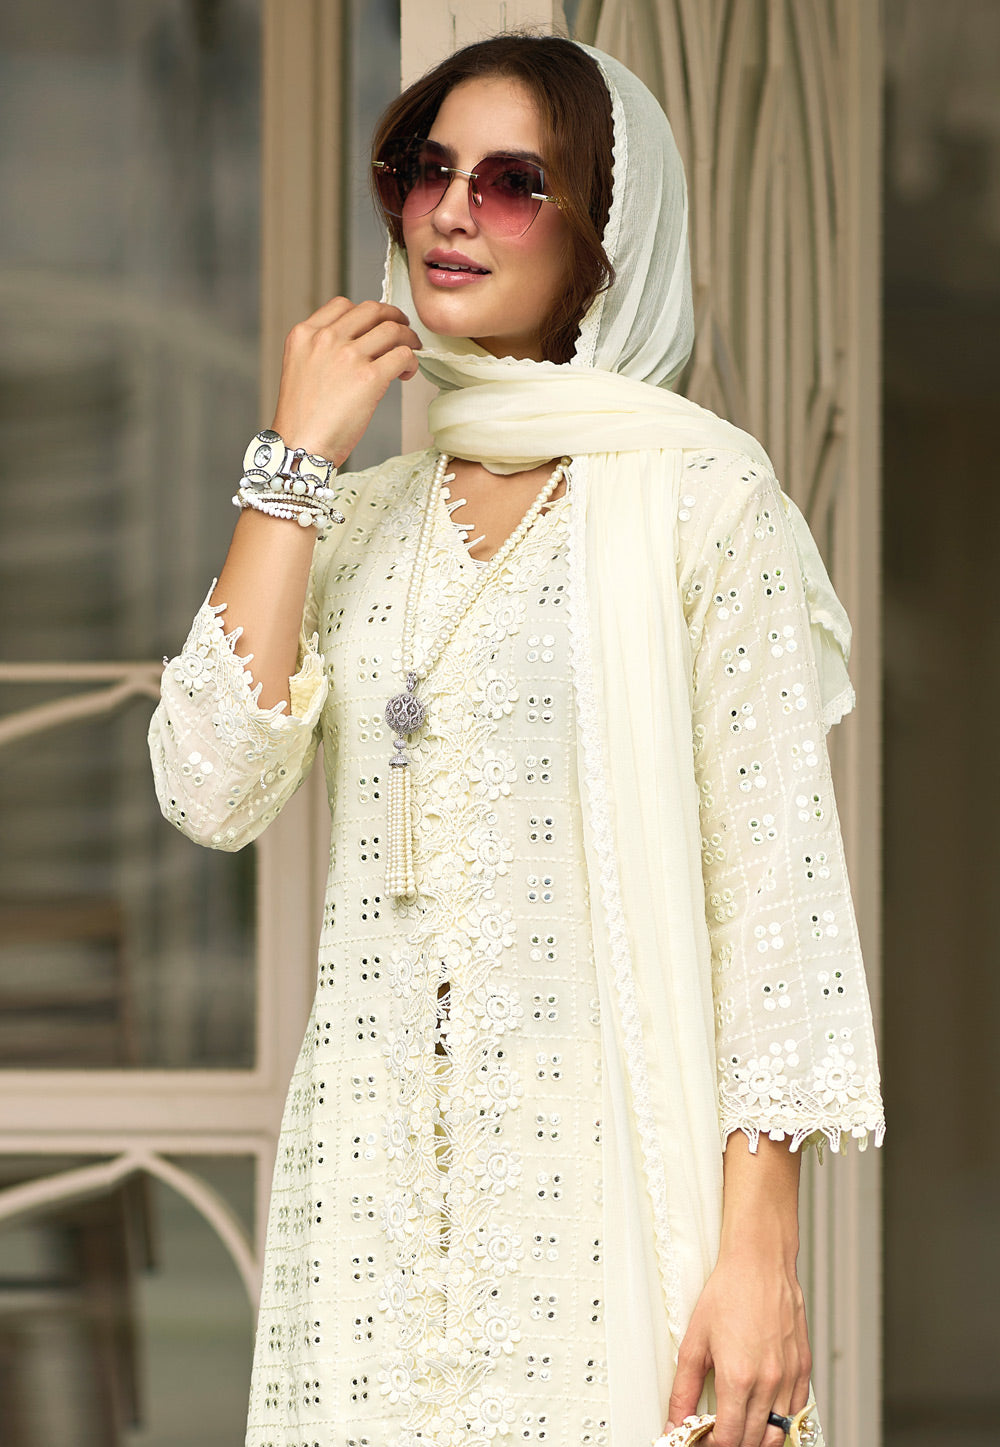 White Color Georgette Embroidered Designer Party Wear Sharara Suits  Near Me